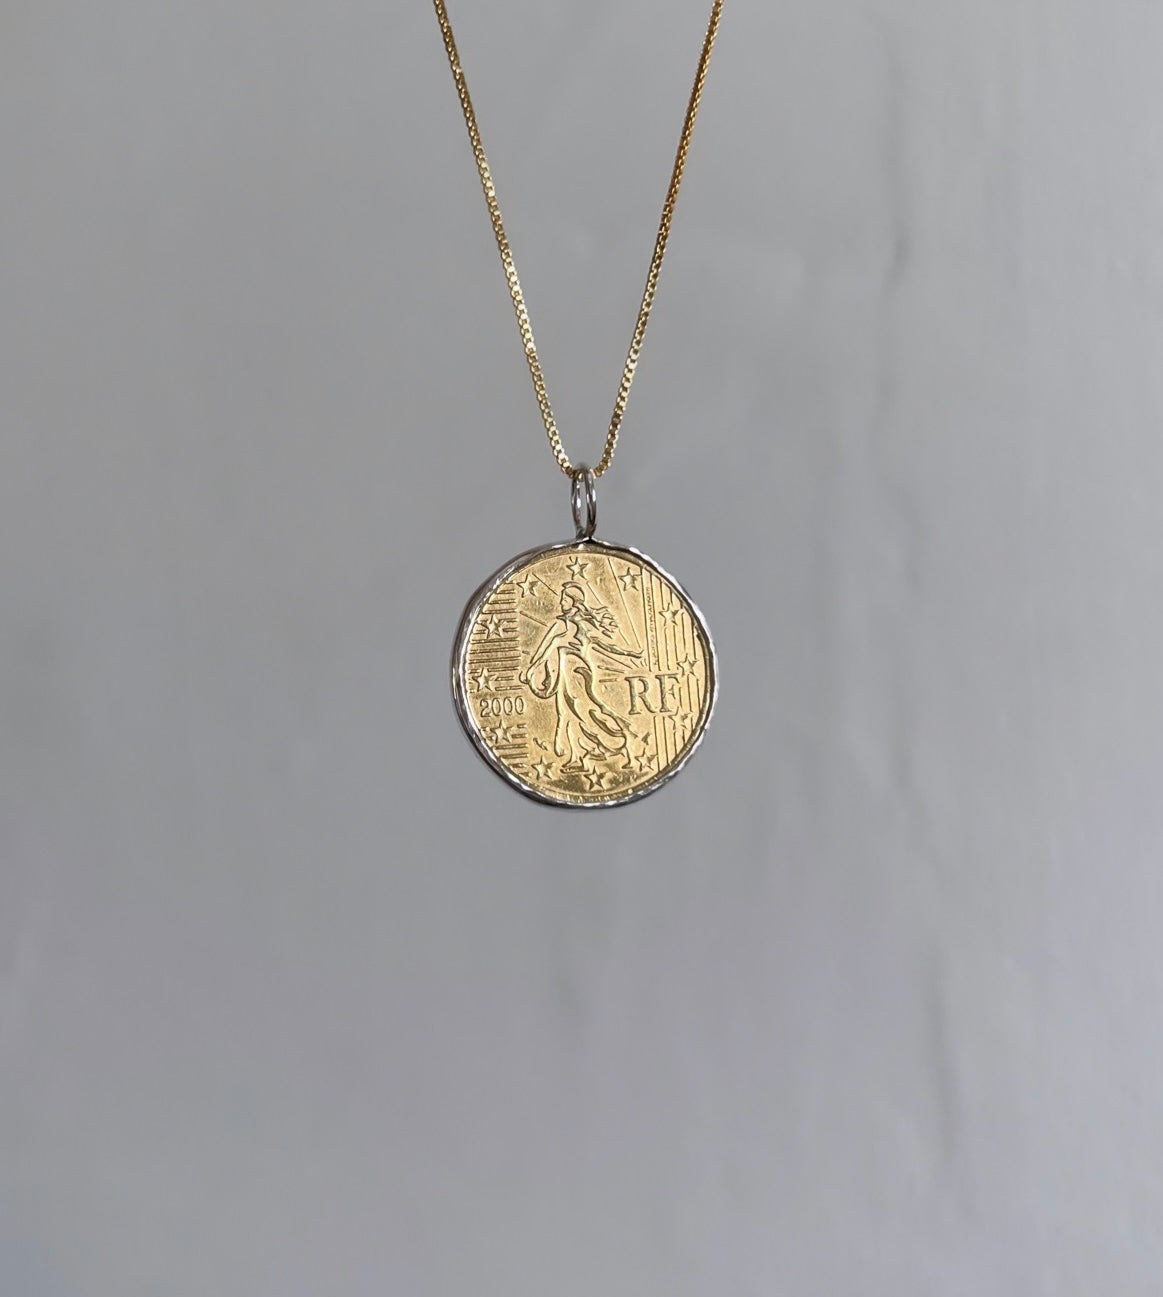 Gold Coin Pendant Necklace for Women Girls Men 925 Sterling Silver 18K Gold  Plated Simple Round Chain Goddess Worship Celebrity Medal Reversible  Keepsake Chic Choker Fashion Jewelry Gifts Box - Walmart.com